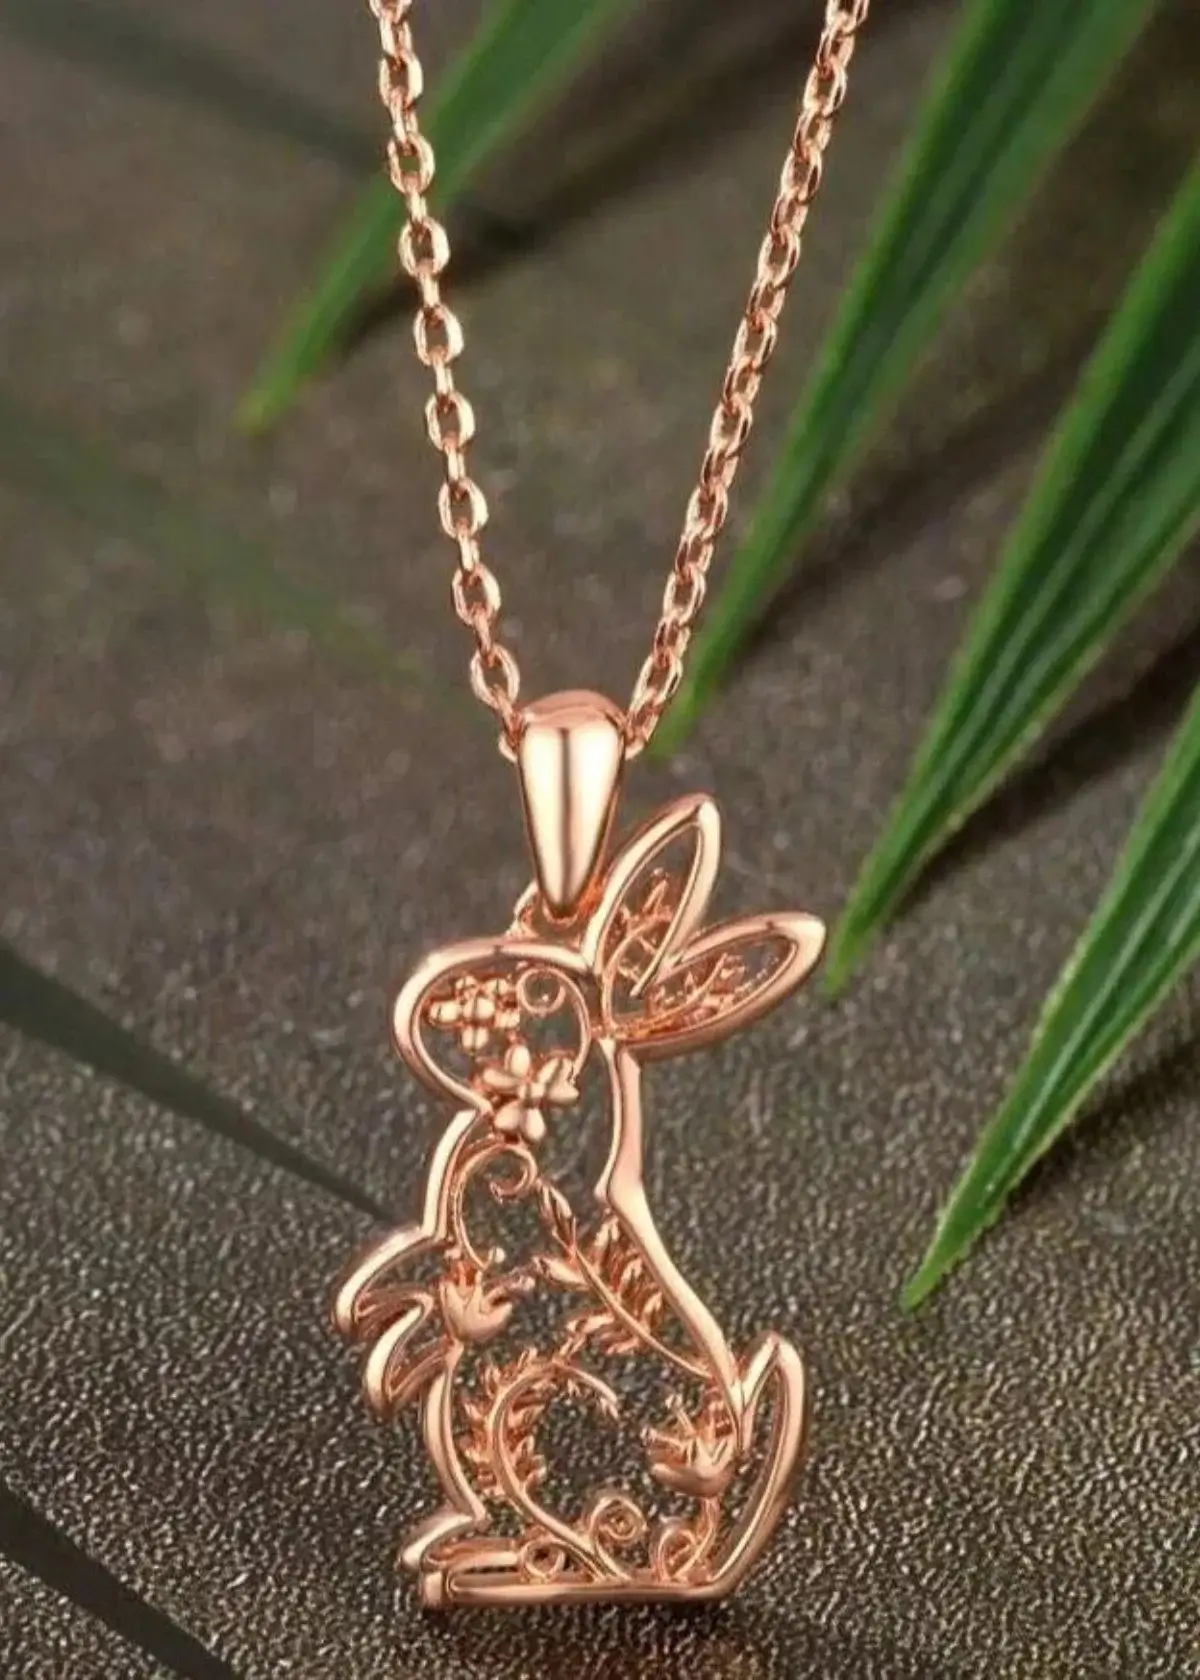 How to choose the right bunny necklace?